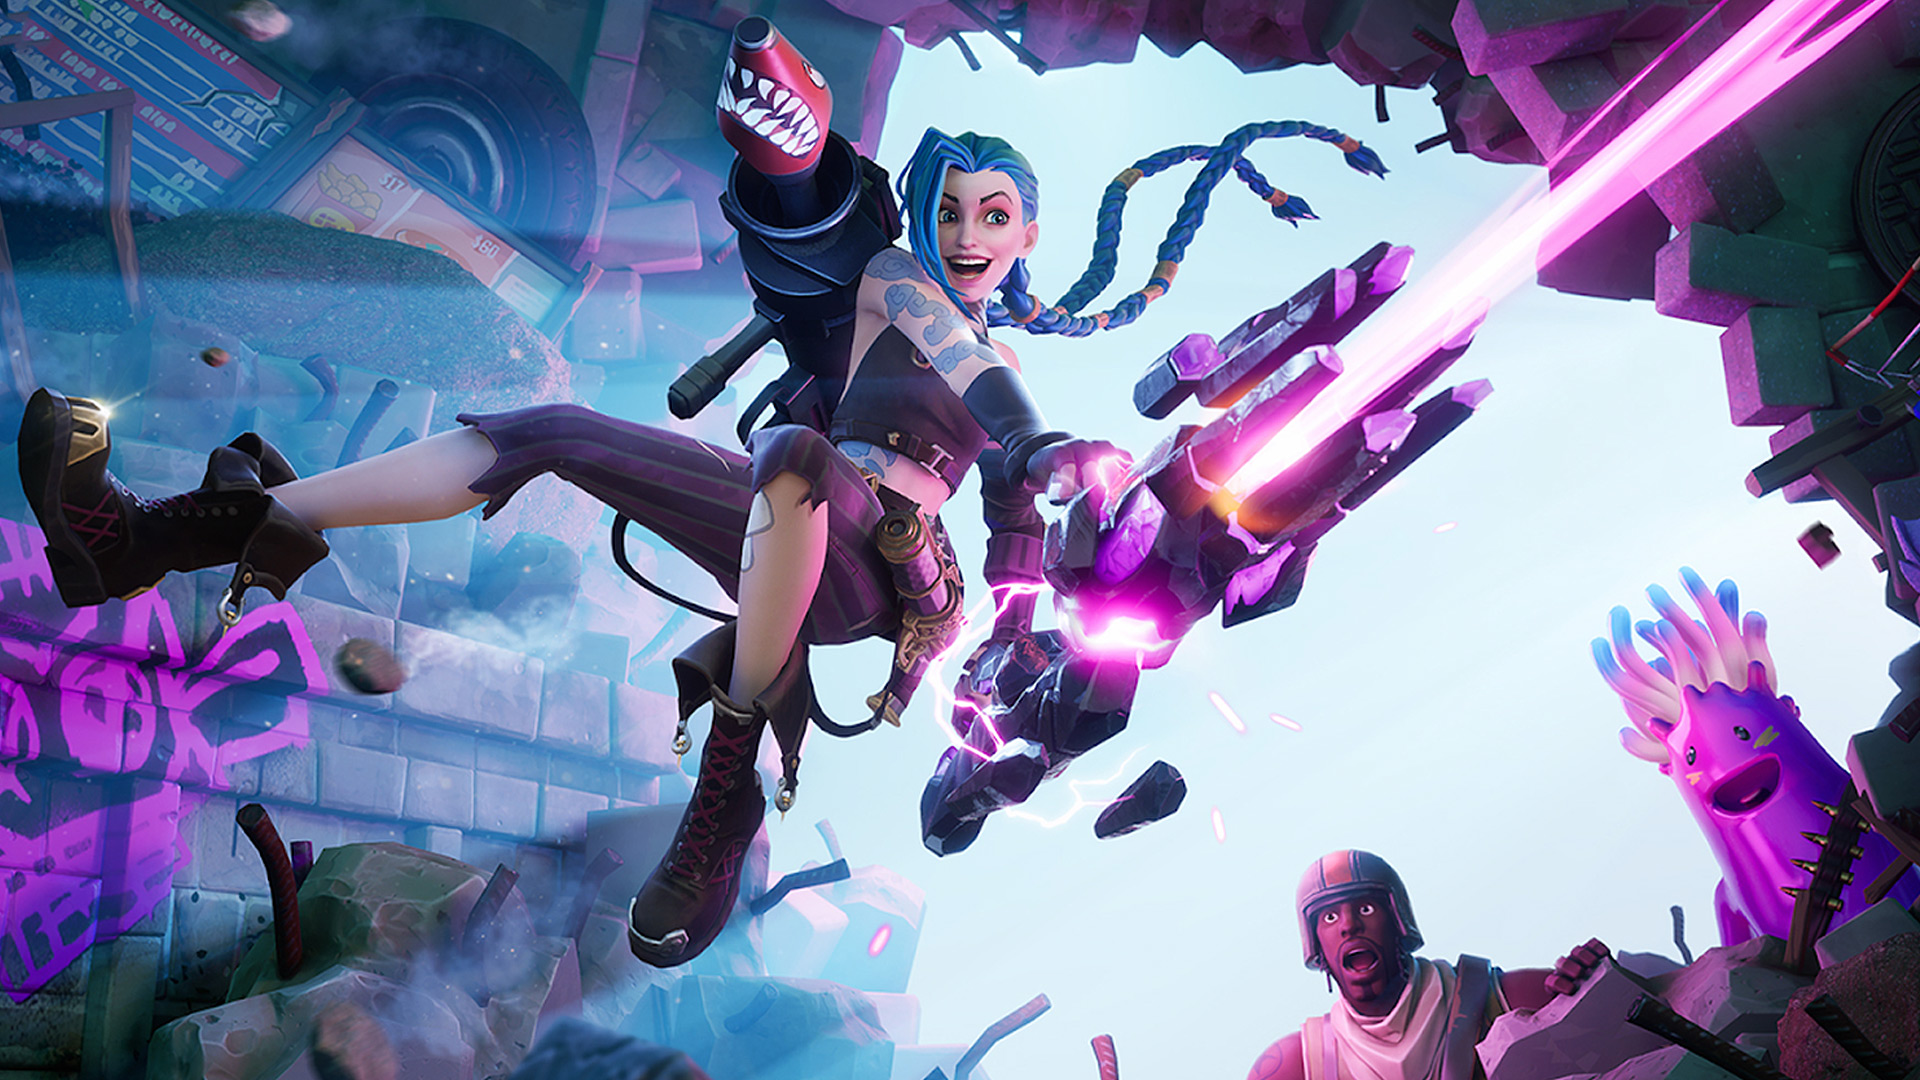 Fortnite x League of Legends Leaked: Jinx to join the Island next